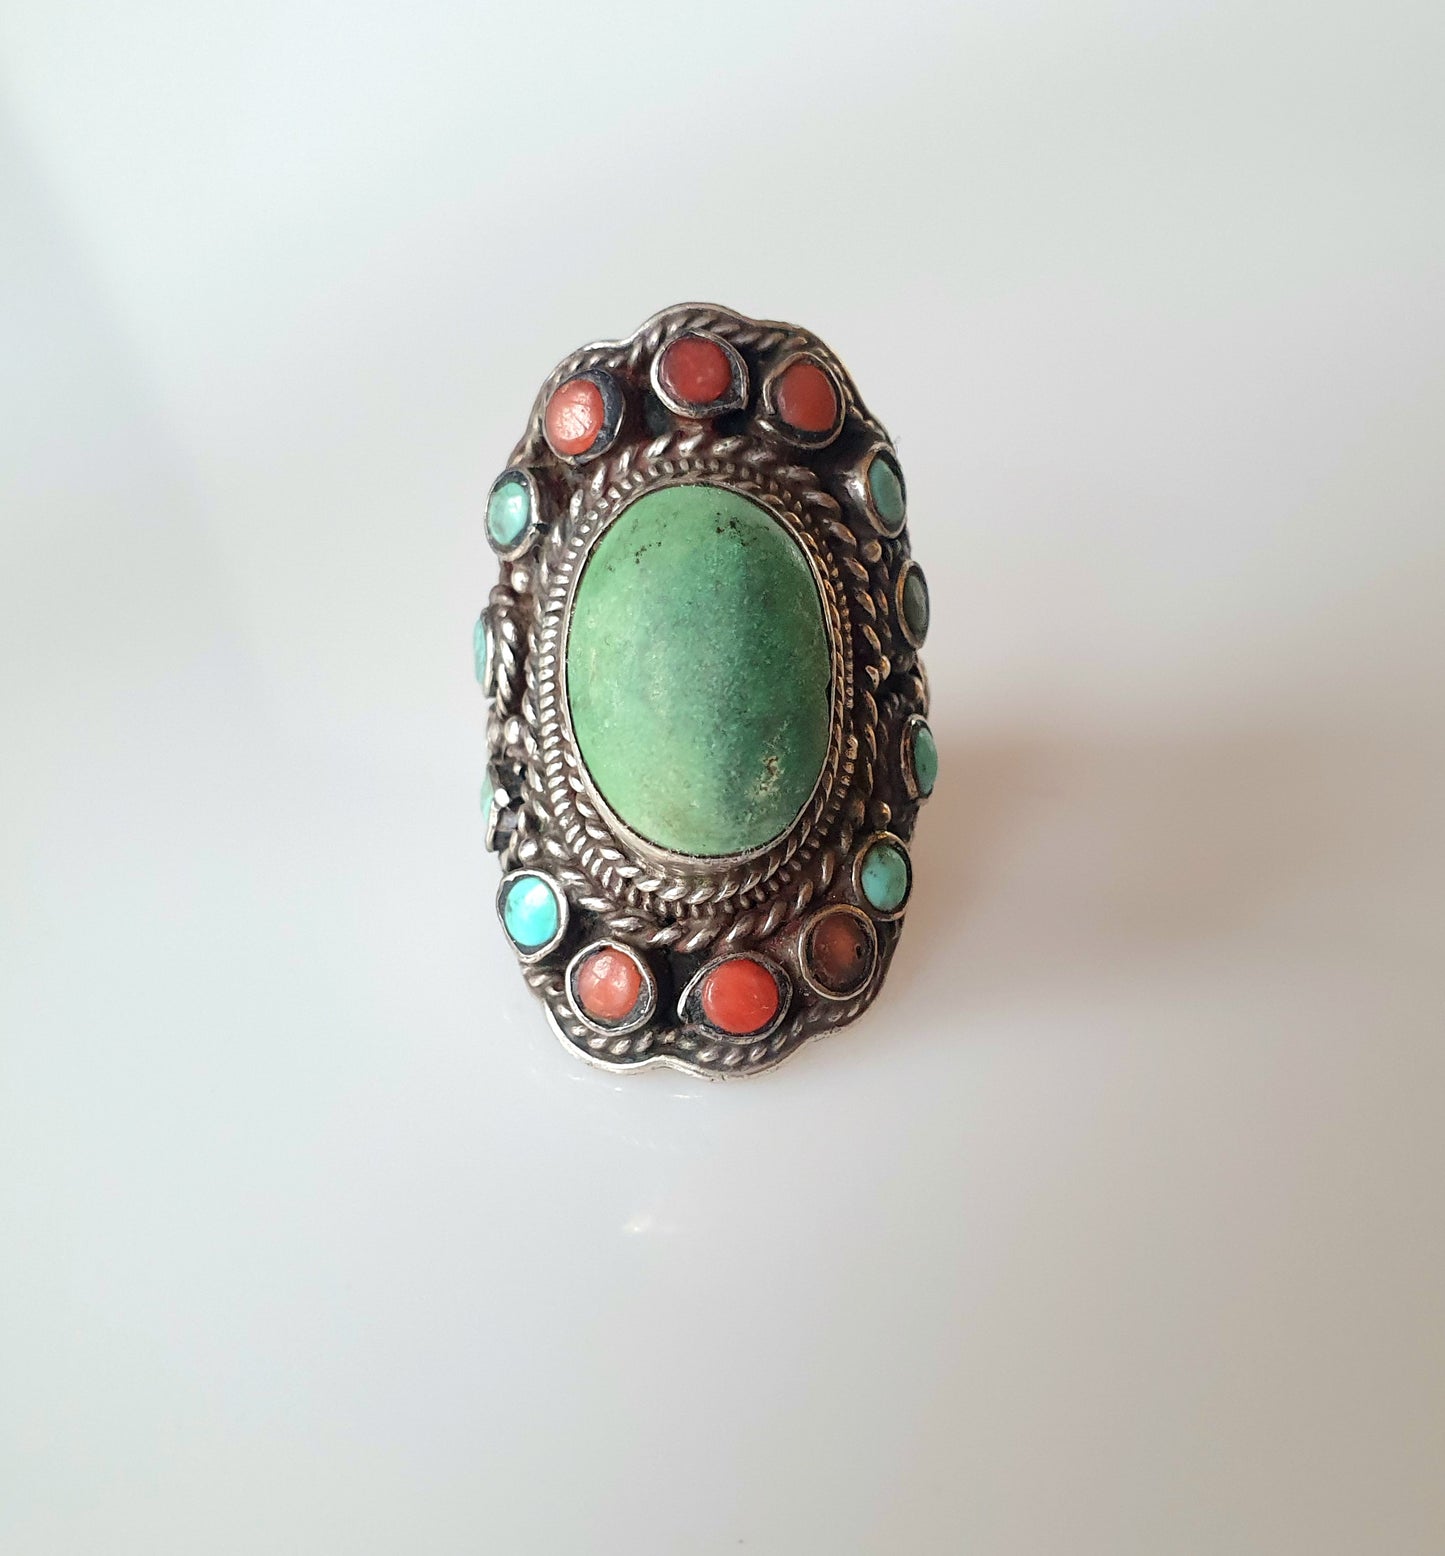 Boho jewelry gifts handmade in solid sterling silver with turquoise gemstones free shipping